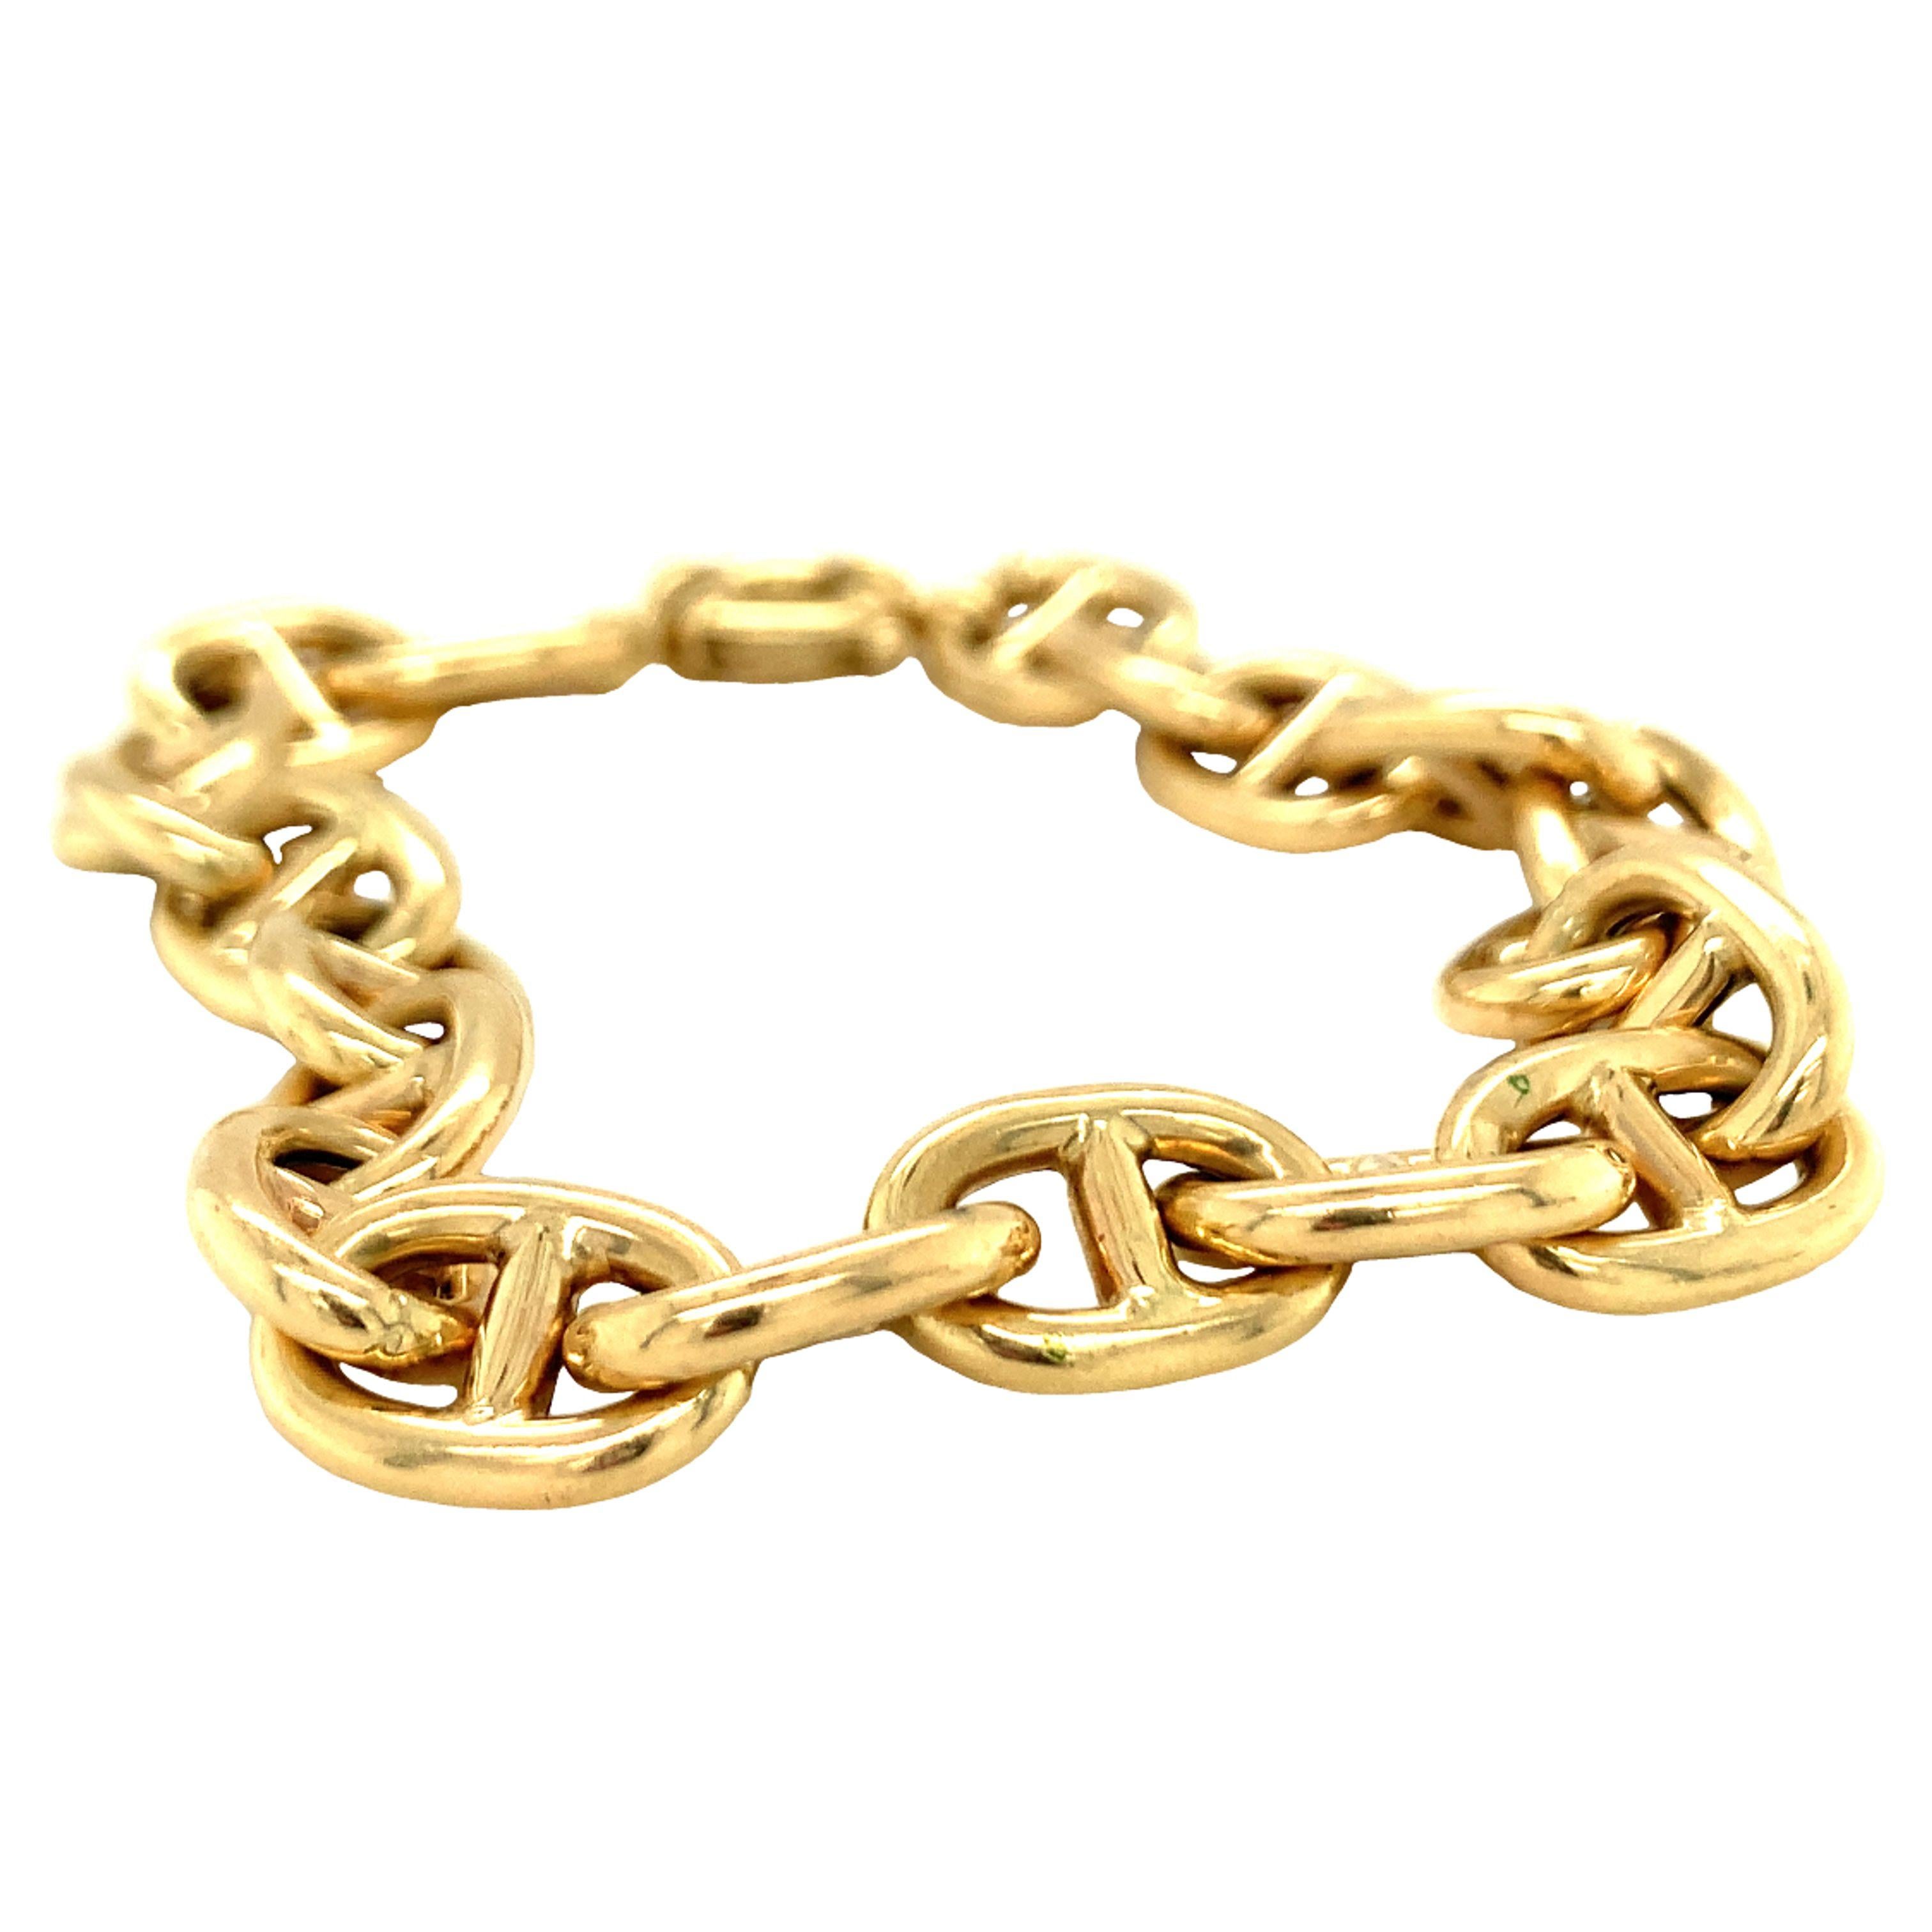 One 14K yellow gold Gucci style puff link bracelet measuring 10 mm. wide and 8.5 inches long. Stamped: “14K, Italy, MMI” and weighs 12.3 grams.

Statement, chunky, golden.

Metal: 14K yellow gold
Circa: 1970s
Stamp/Hallmark: 14K, Italy,